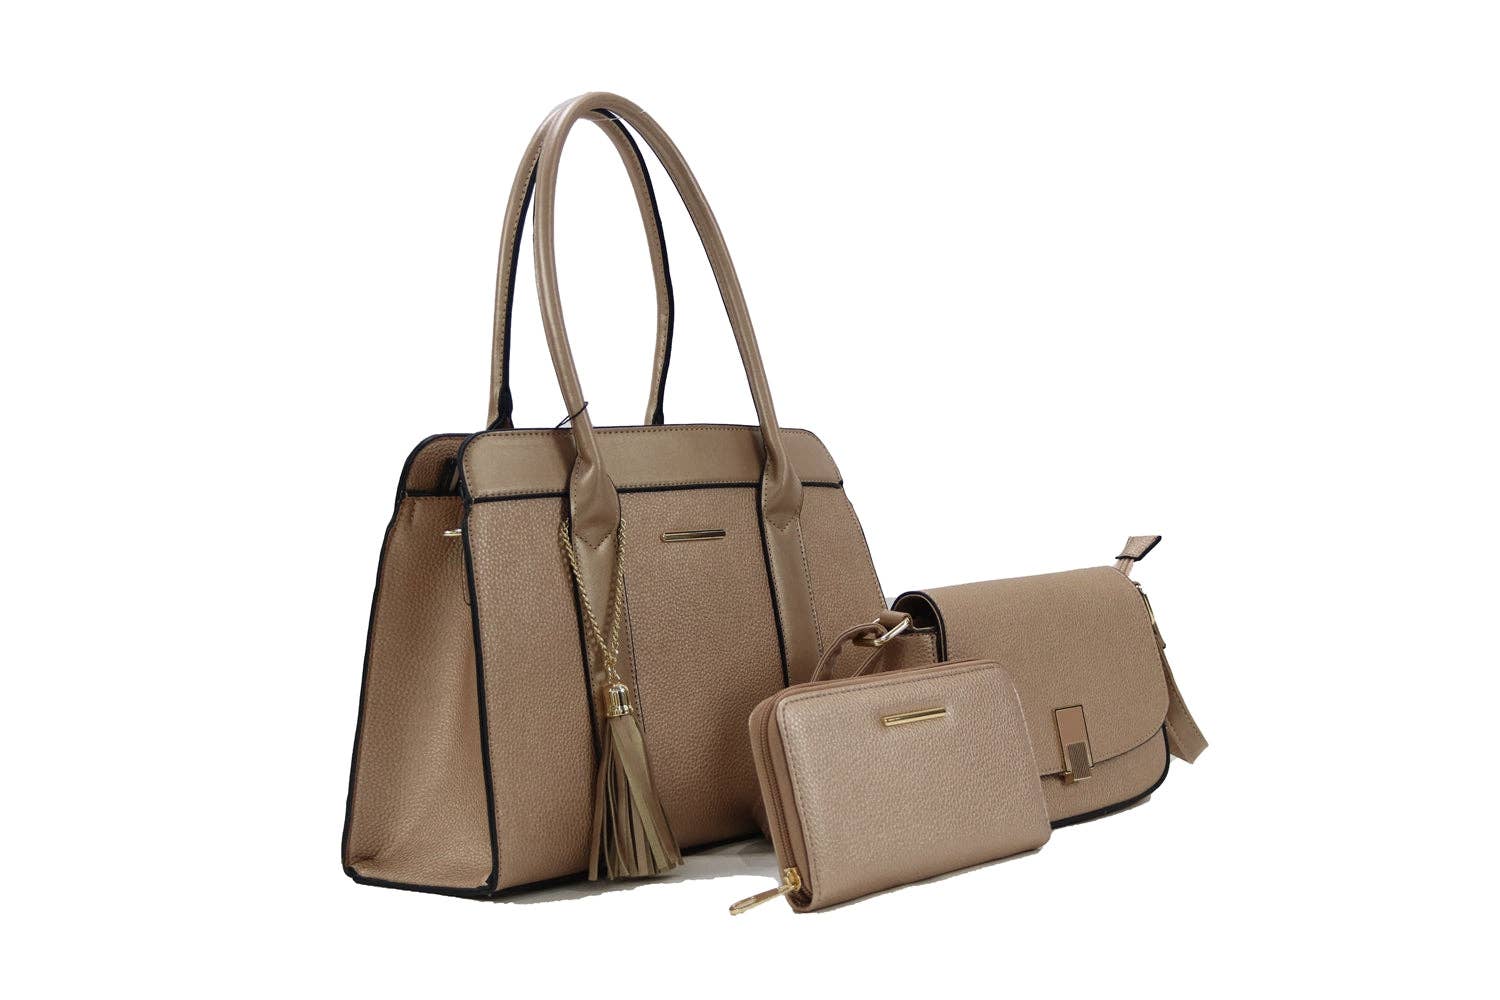 Vince Camuto Saly Small Leather Tote - 21050066 | HSN